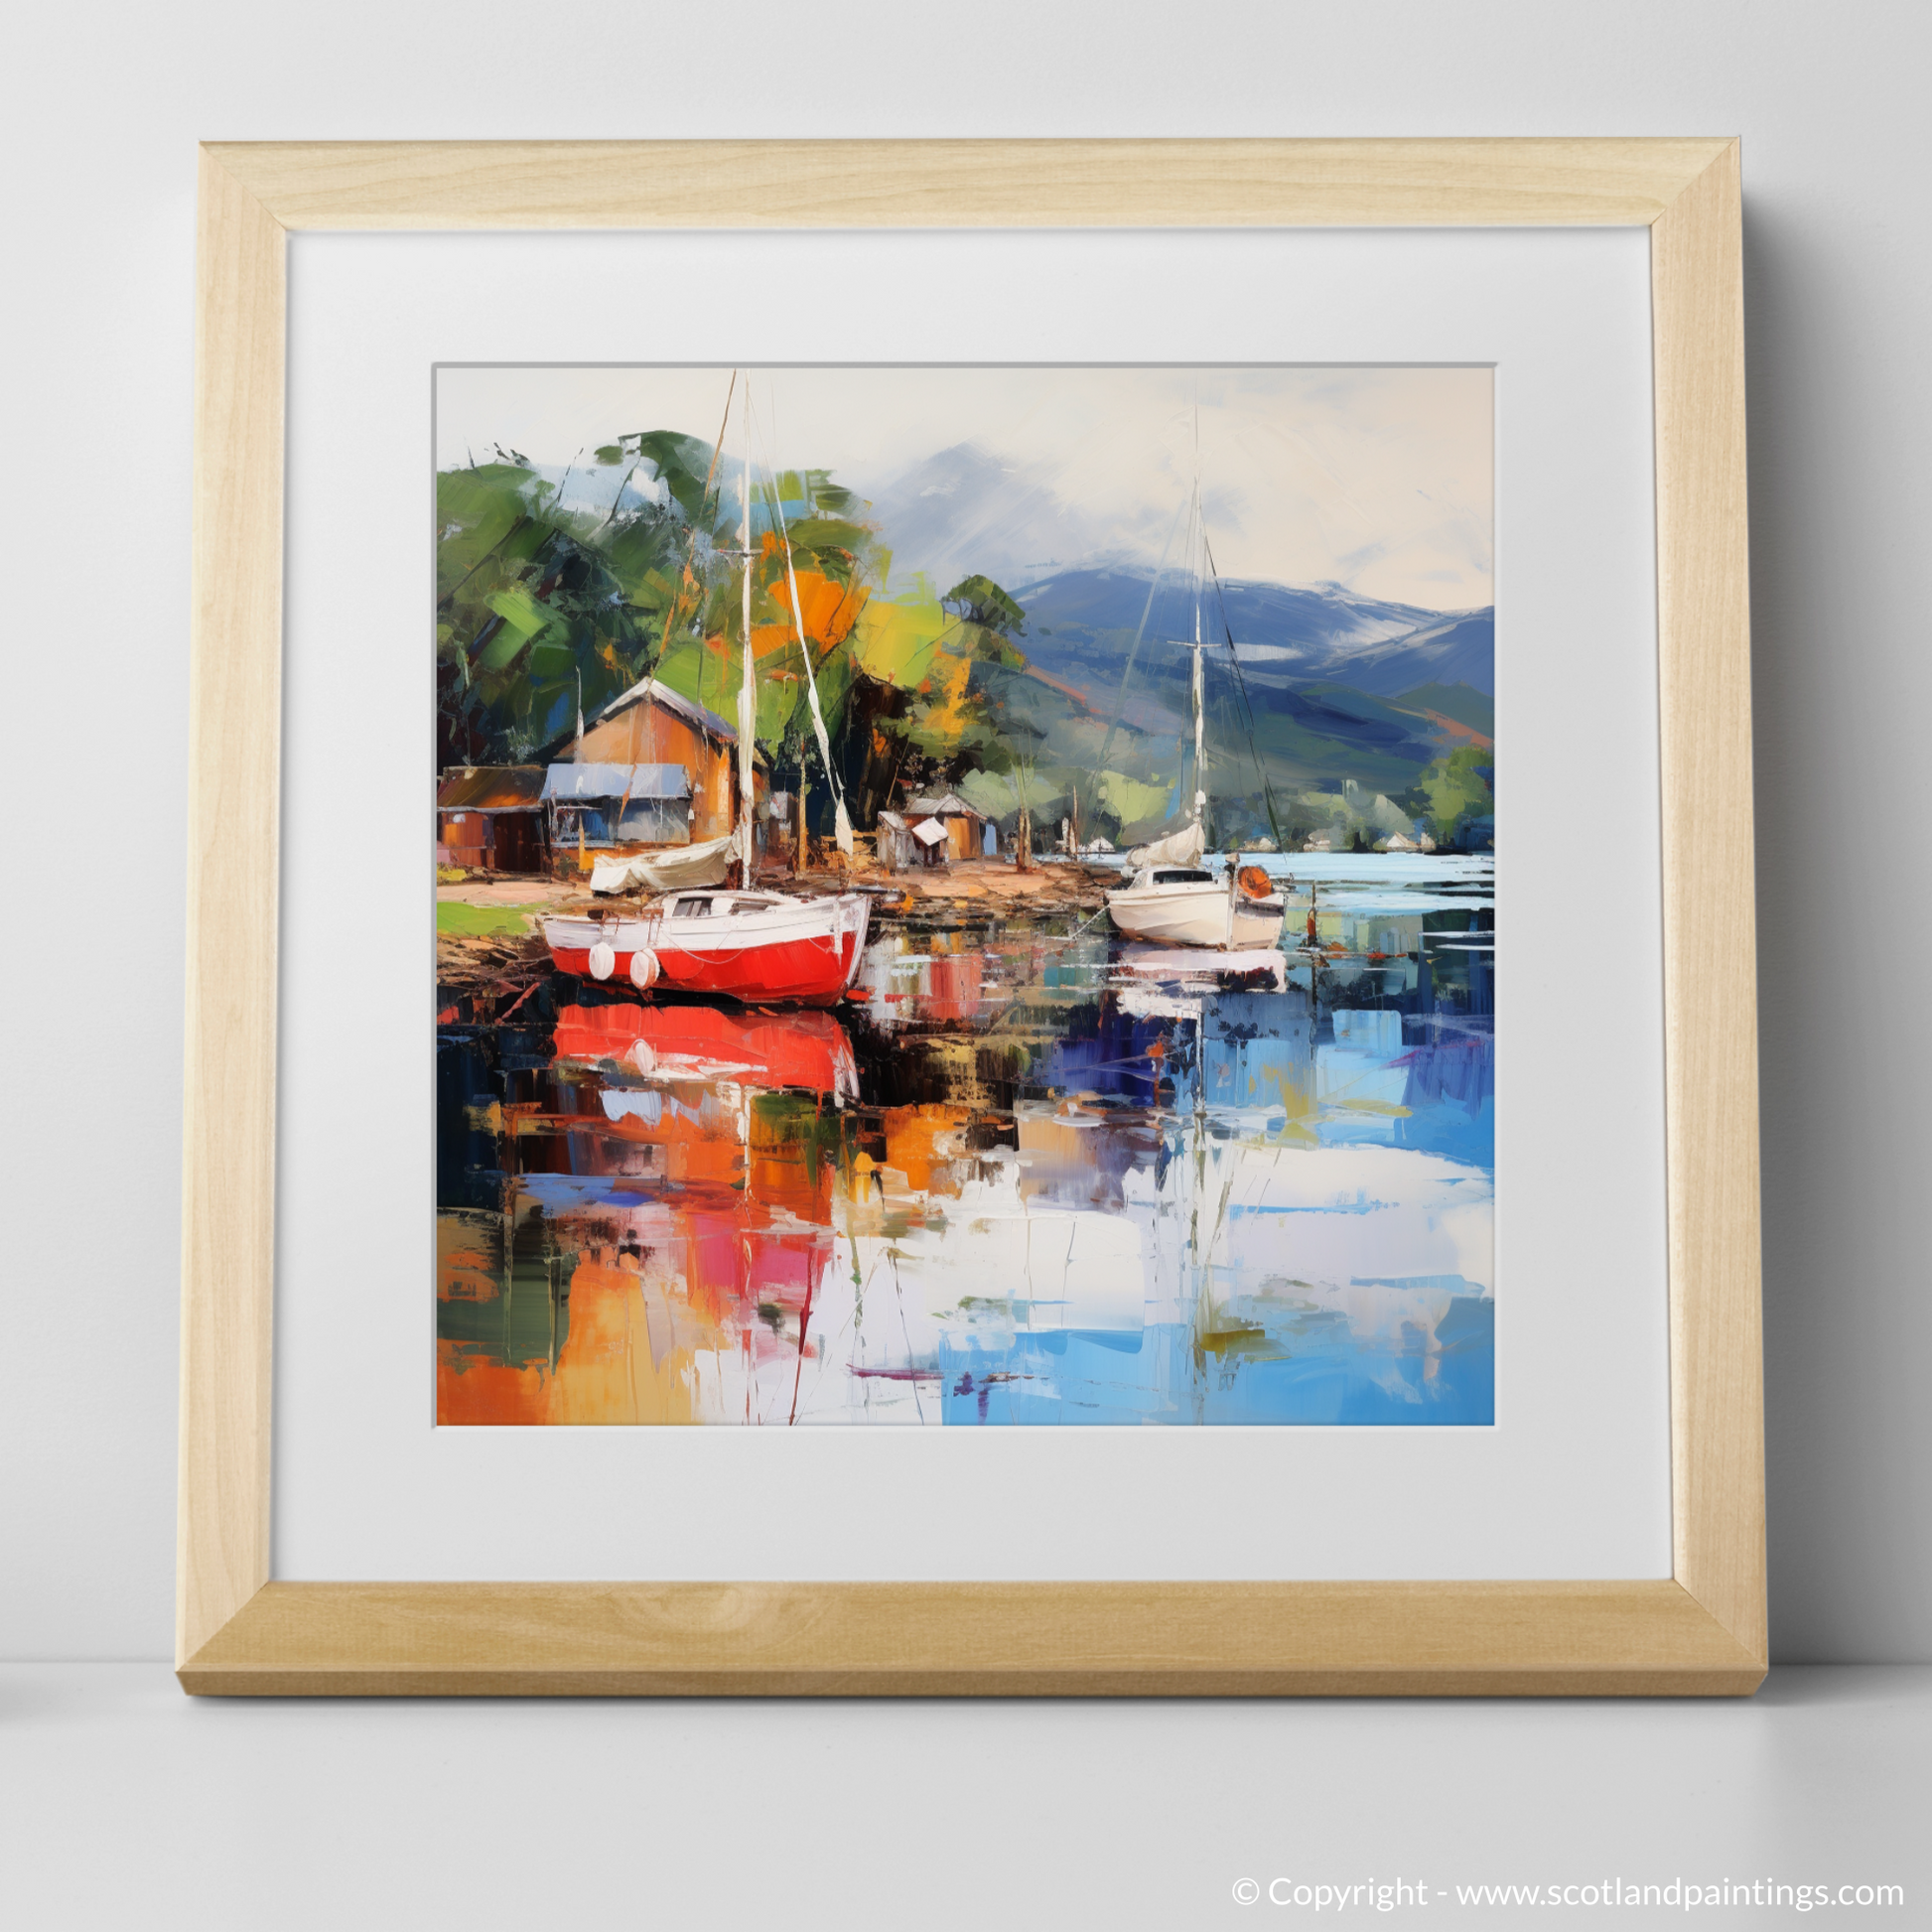 Art Print of Balmaha Harbour, Loch Lomond with a natural frame